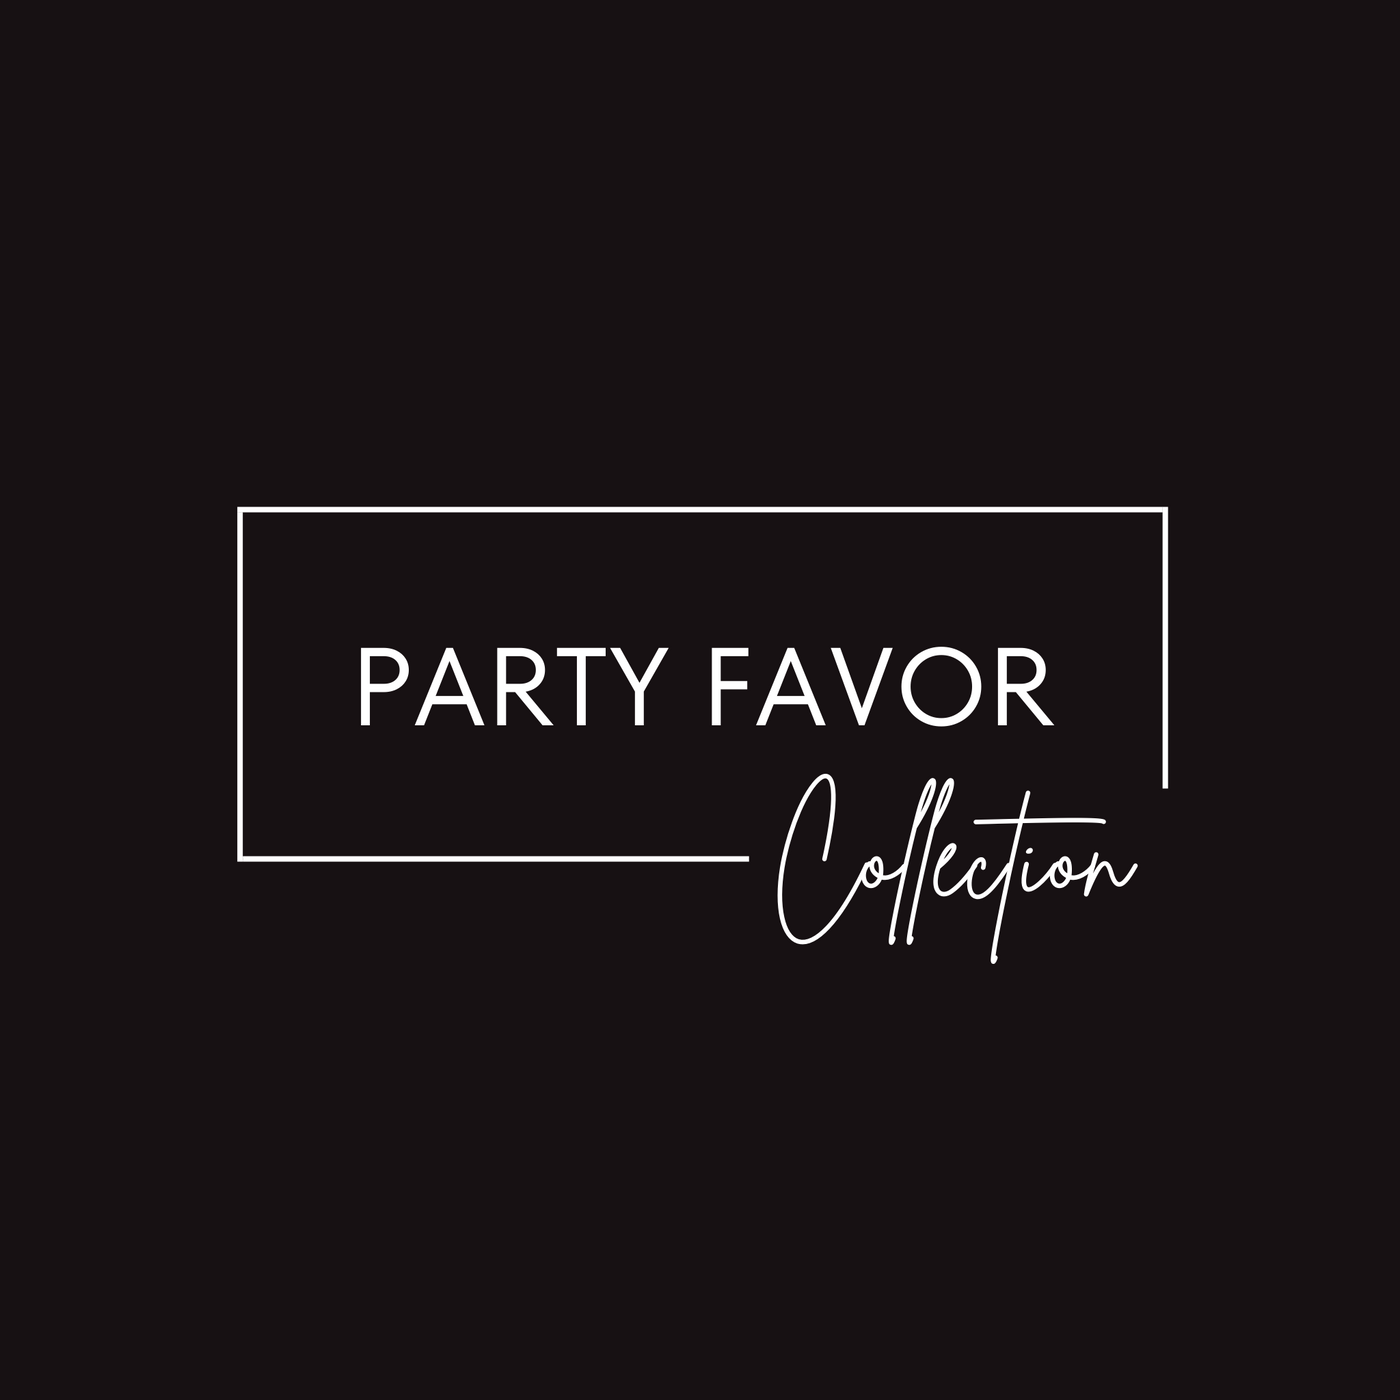 Party Favor Collection